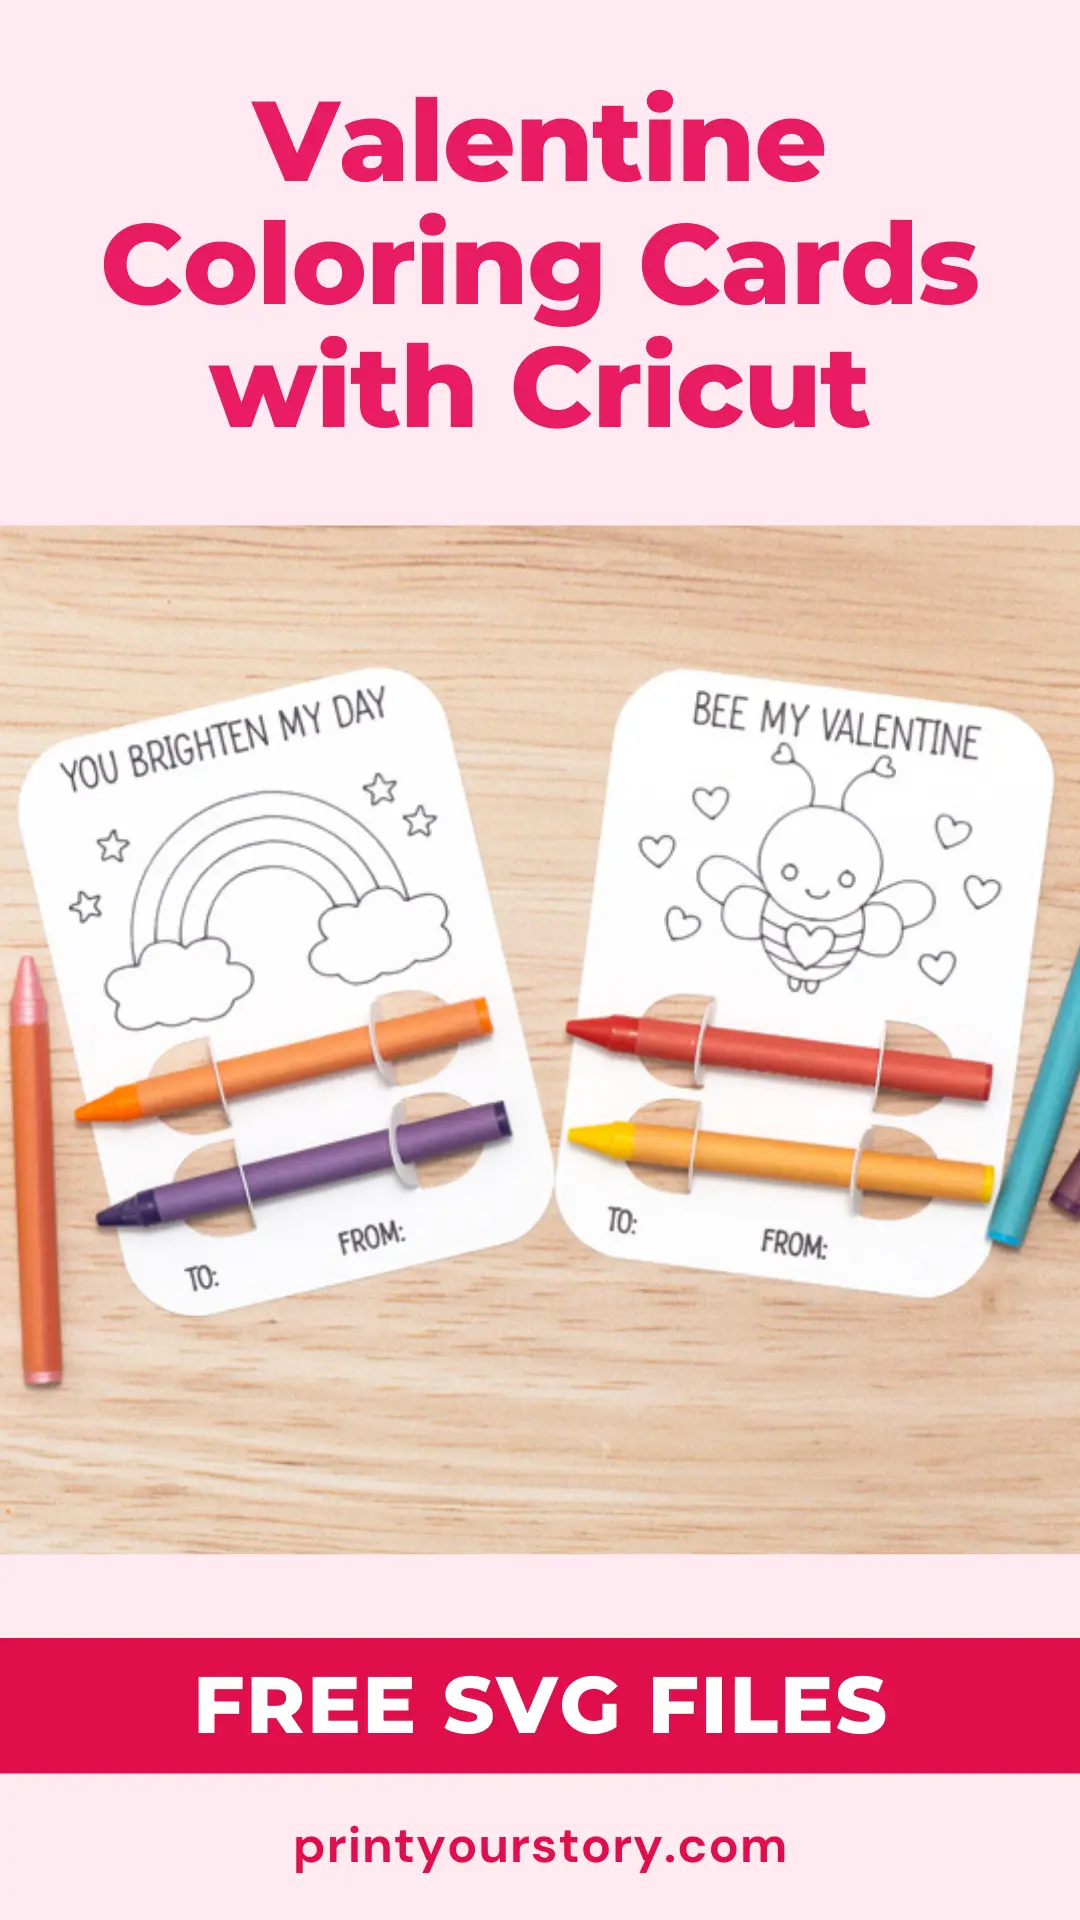 Free Valentine Coloring Cards SVG files for Cricut